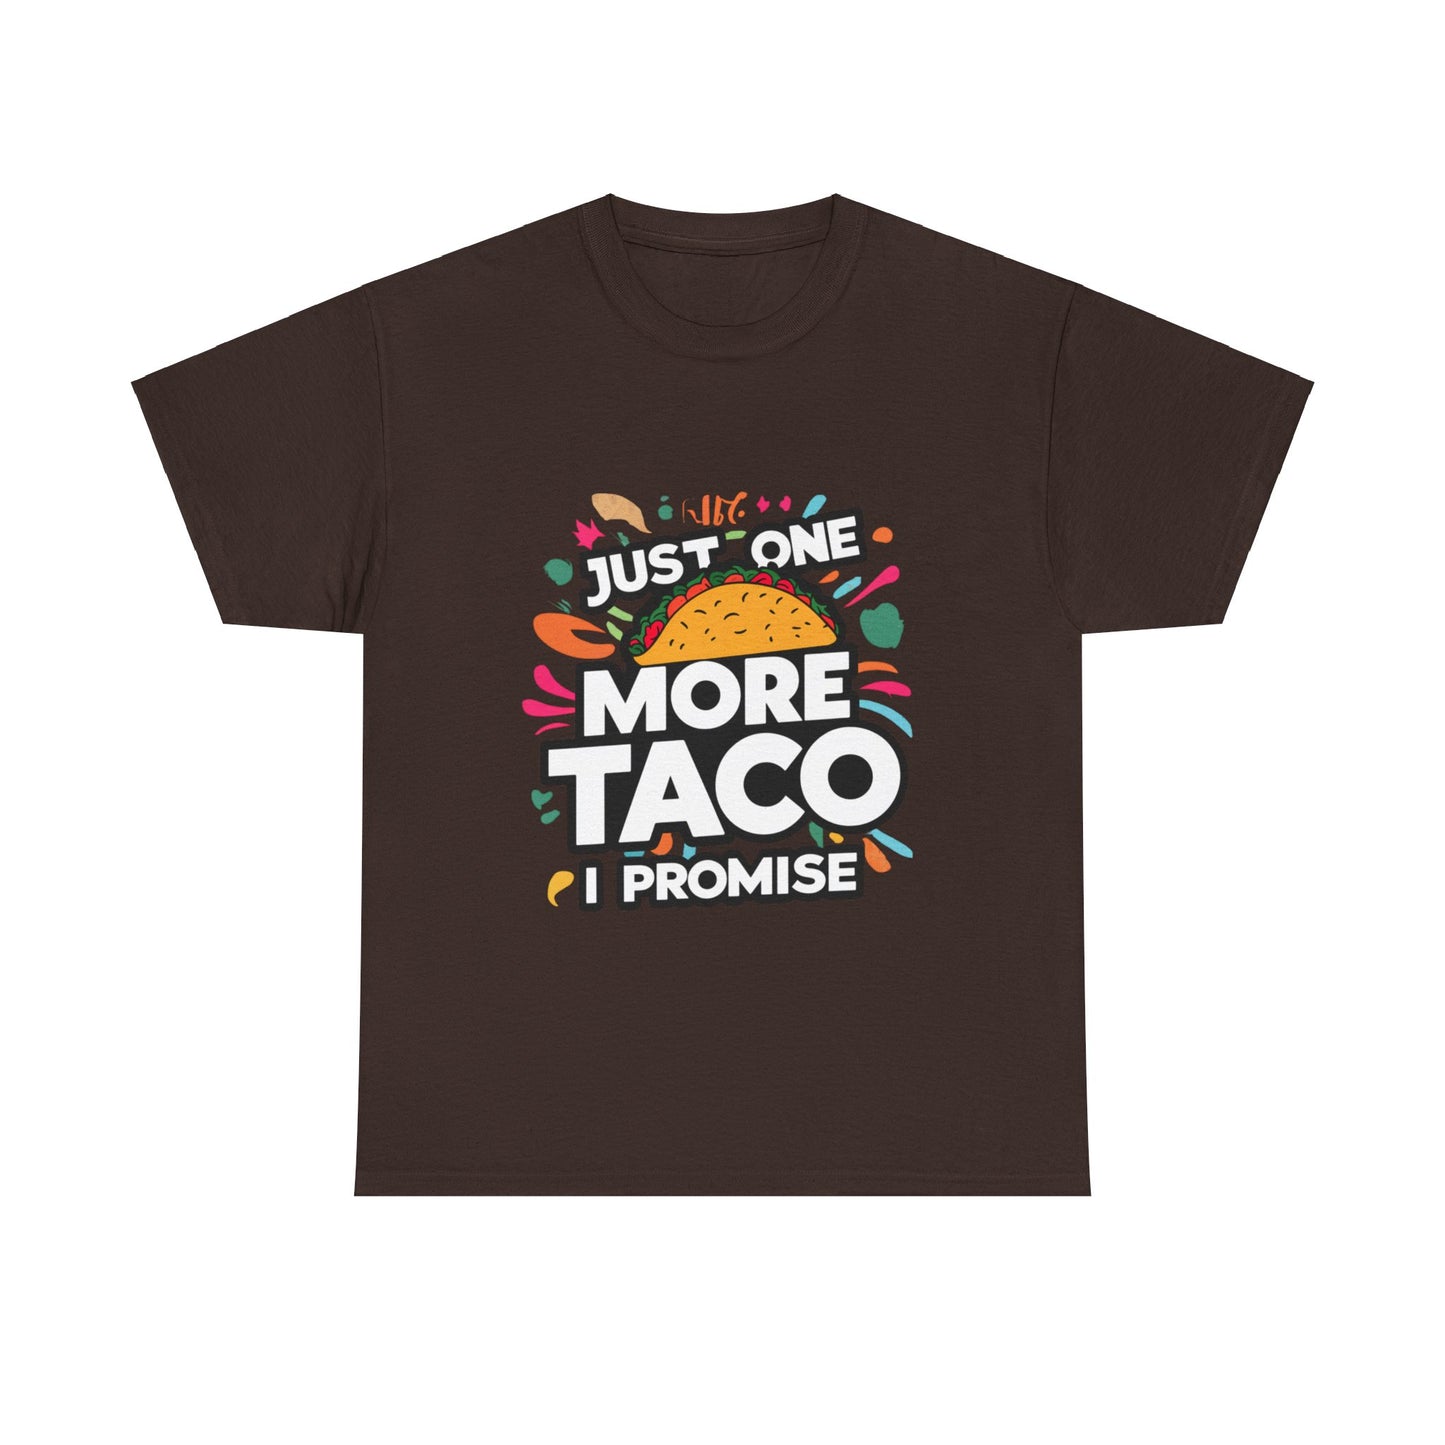 Just One More Taco I Promise Mexican Food Graphic Unisex Heavy Cotton Tee Cotton Funny Humorous Graphic Soft Premium Unisex Men Women Dark Chocolate T-shirt Birthday Gift-3